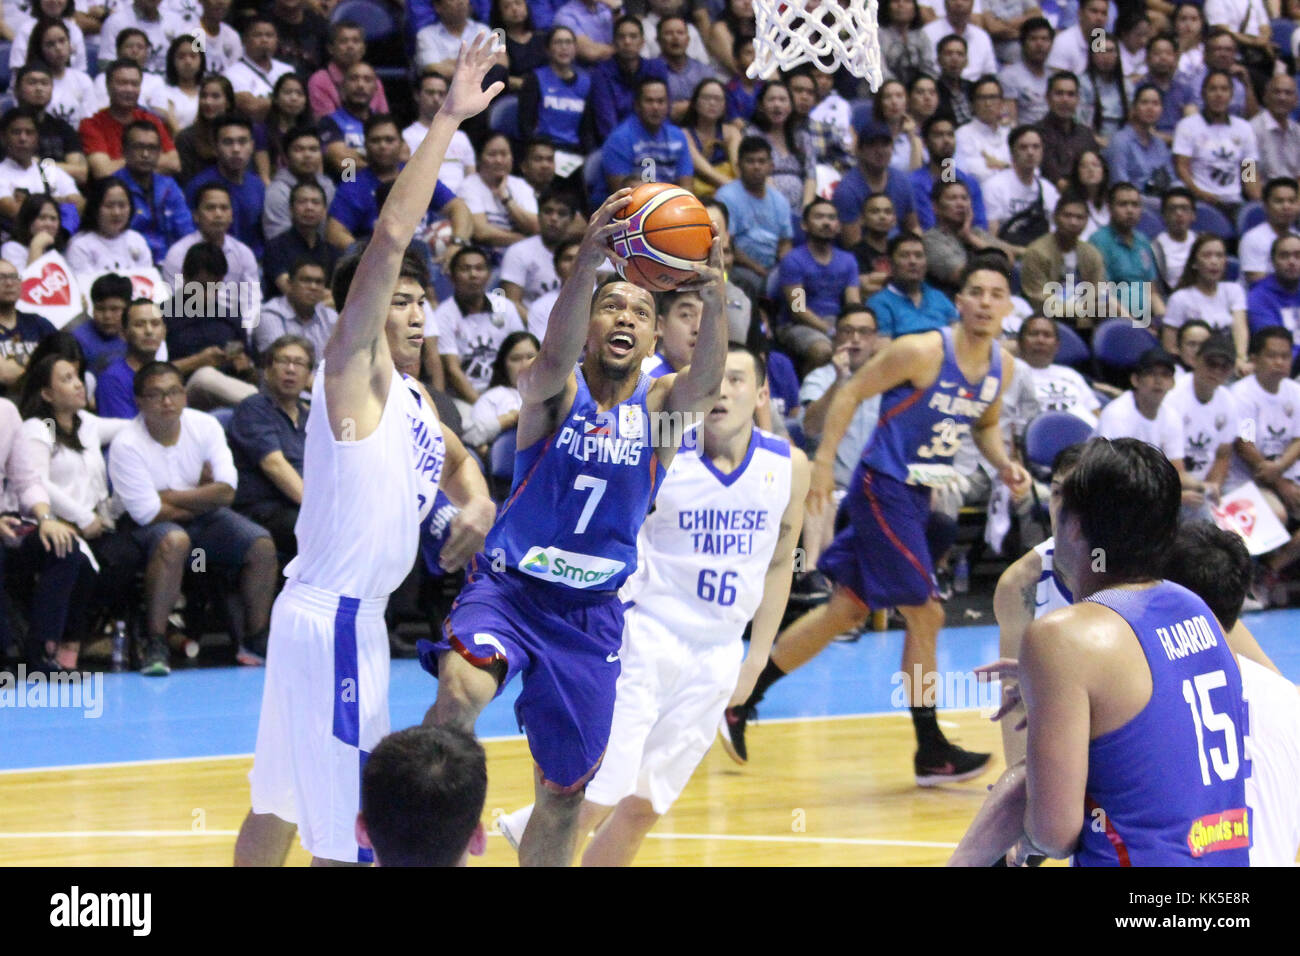 Quezon City, Philippines. 27th Nov, 2017. Jayson Castro William (7) of the Philippines drives past several players from Chinese Taipei to convert an uncontested lay-up during their FIBA World Cup Qualifying Match. Gilas Pilipinas defeated the visiting Chinese Taipei team 90-83 to complete a sweep of their first two assignments in the FIBA 2019 World Cup qualifiers. Credit: Dennis Jerome Acosta/ Pacific Press/Alamy Live News Stock Photo